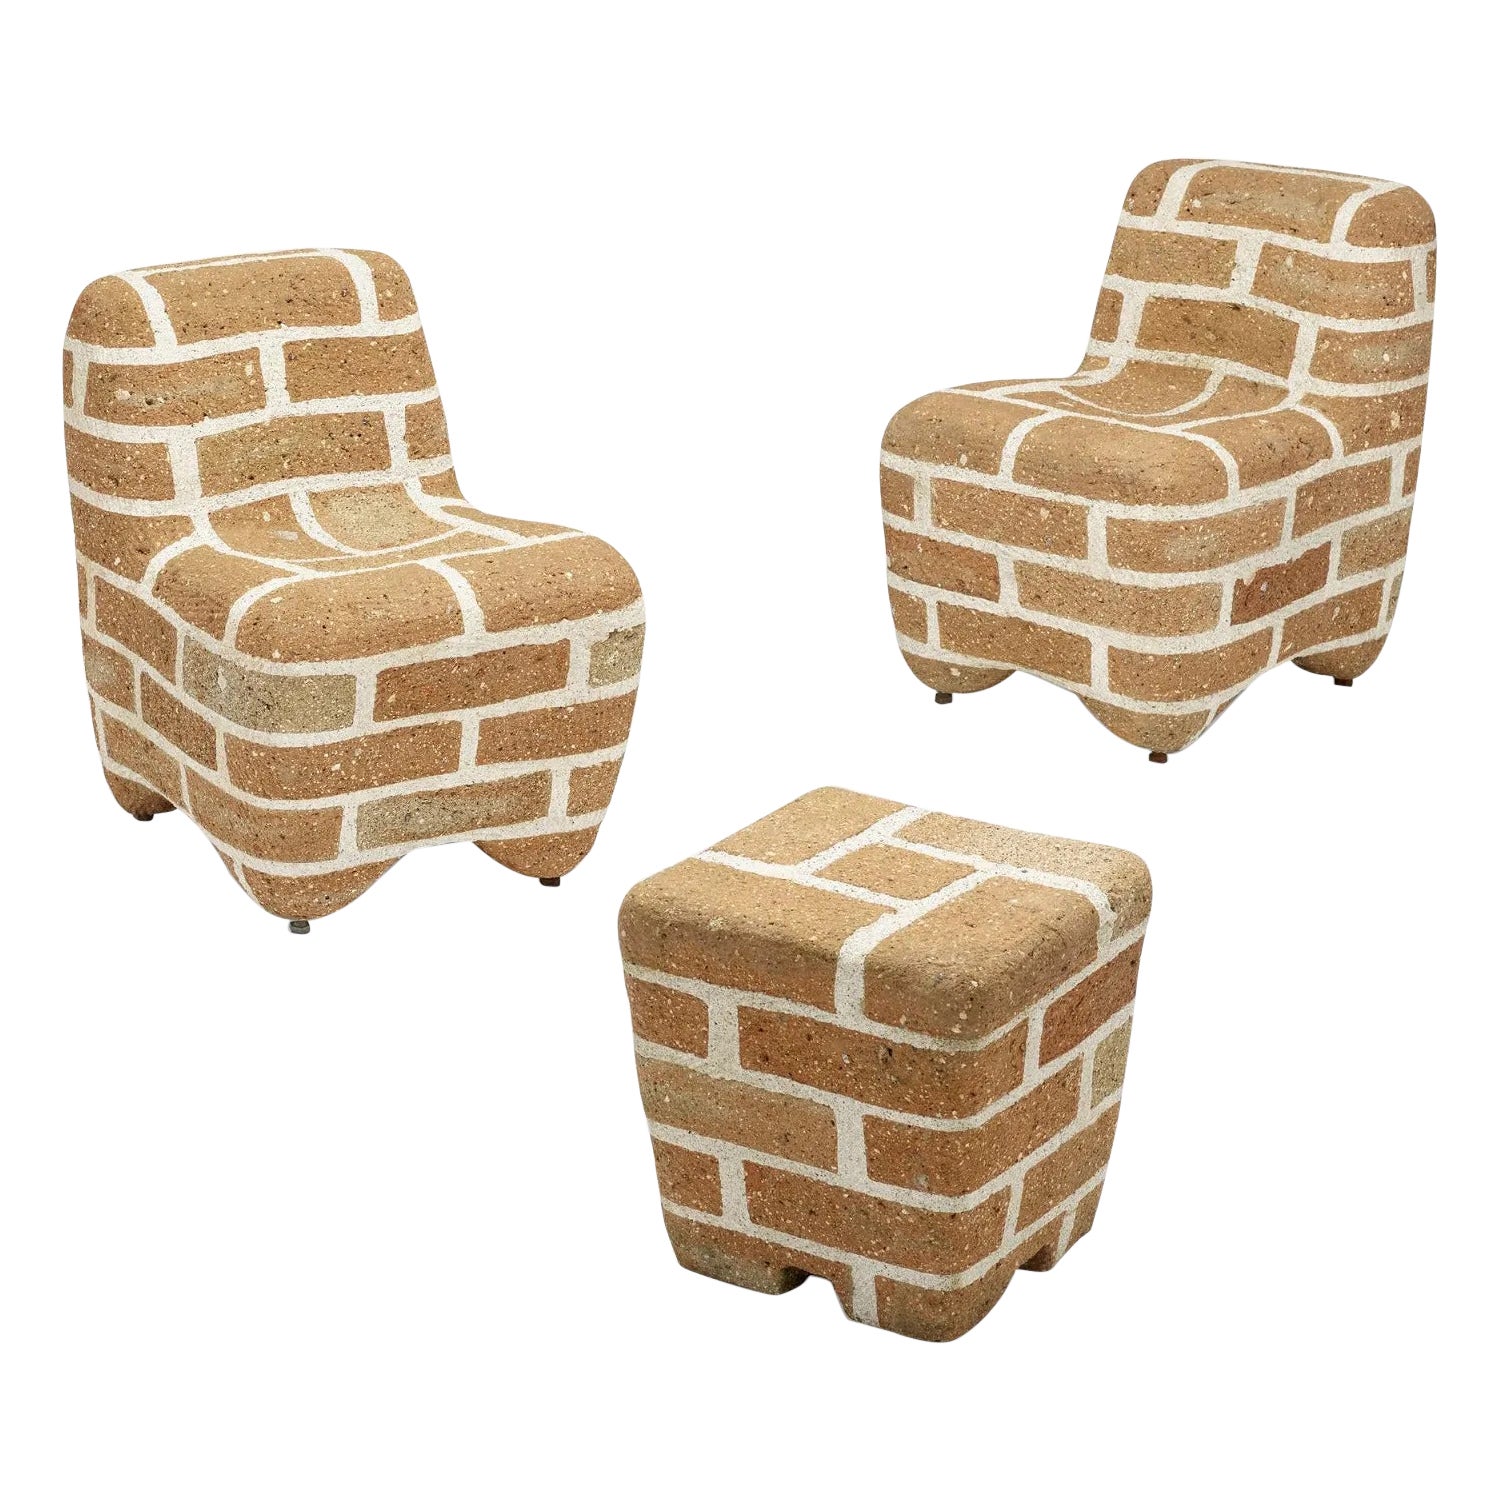 Ali Acerol Brick and Mortar Pattern Chairs and Table Sculptures For Sale